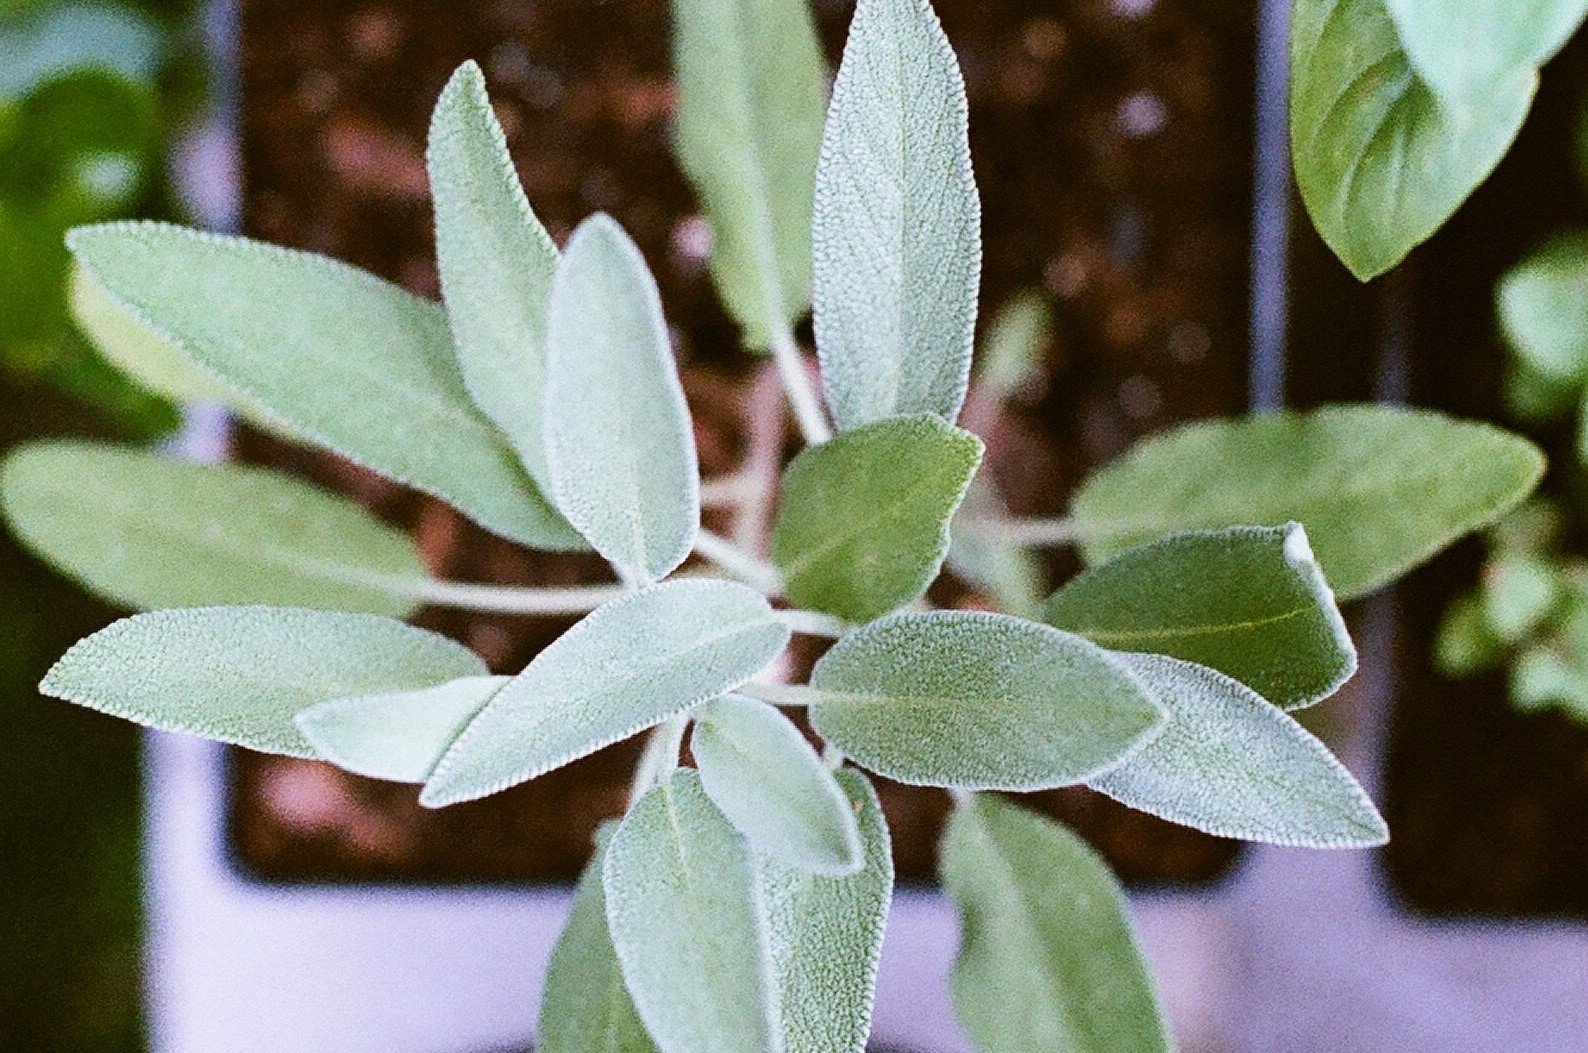 Home remedy - Sage leaves for Cough